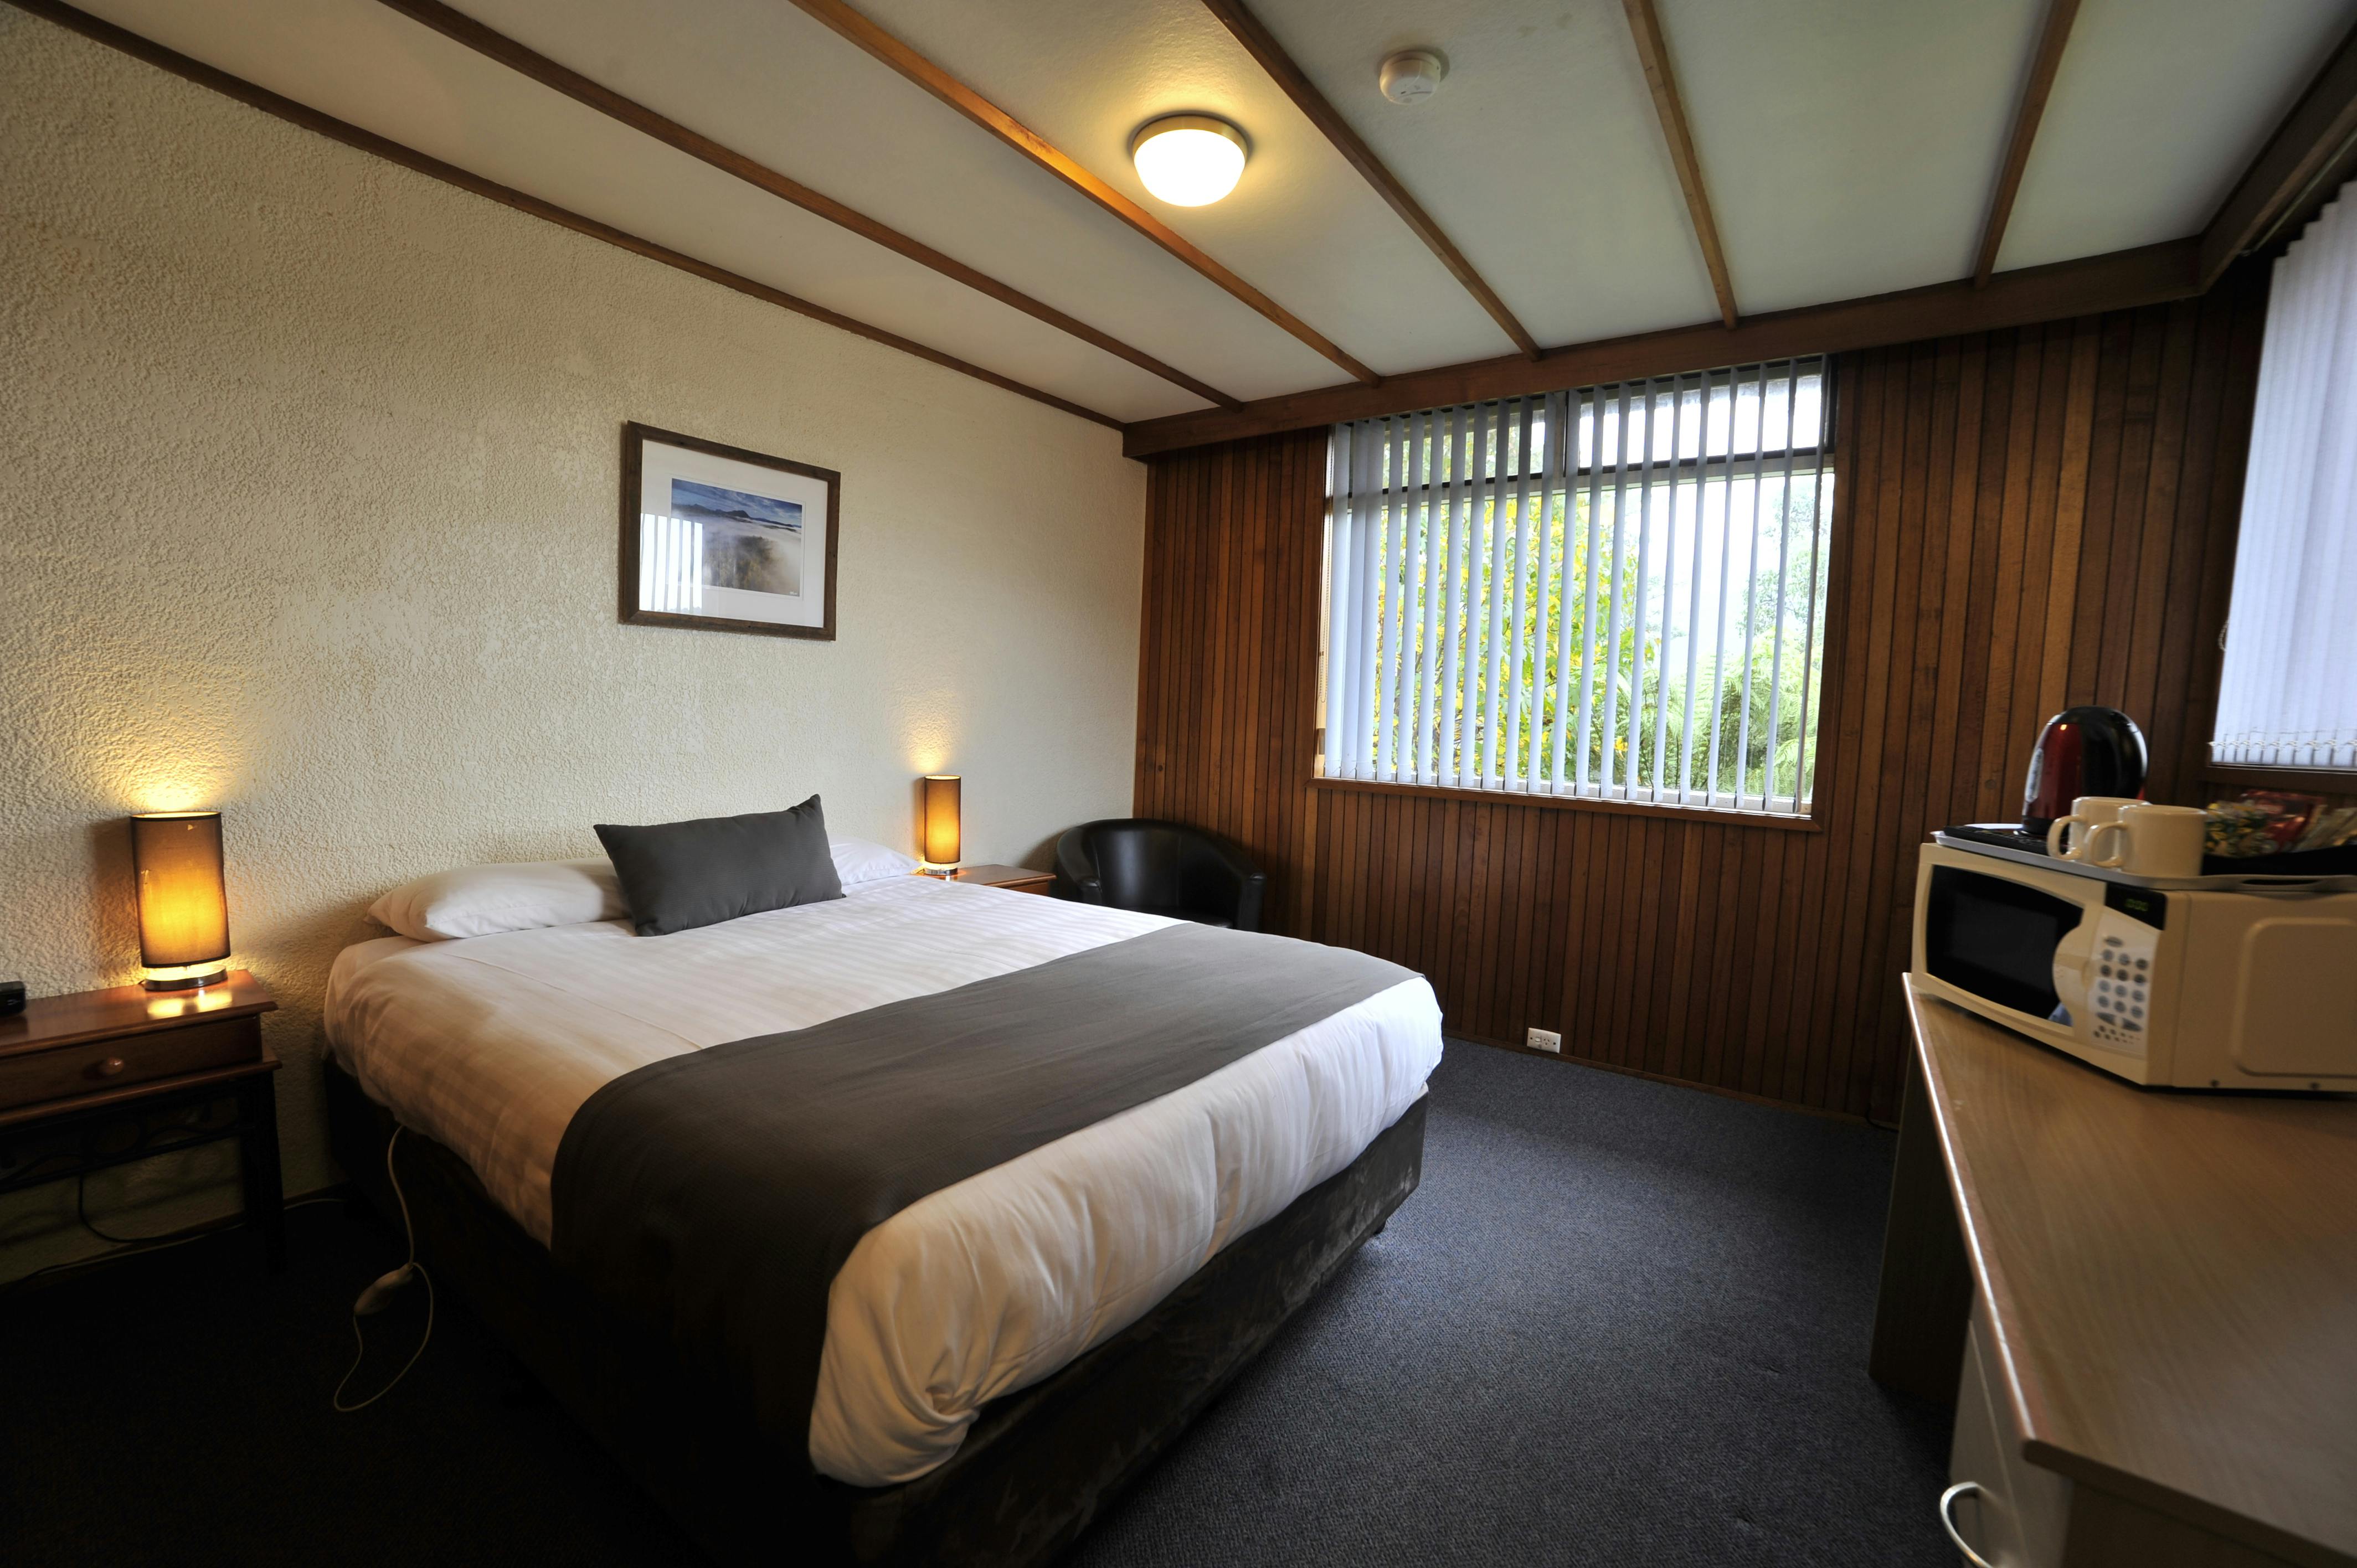 Queen accommodation room